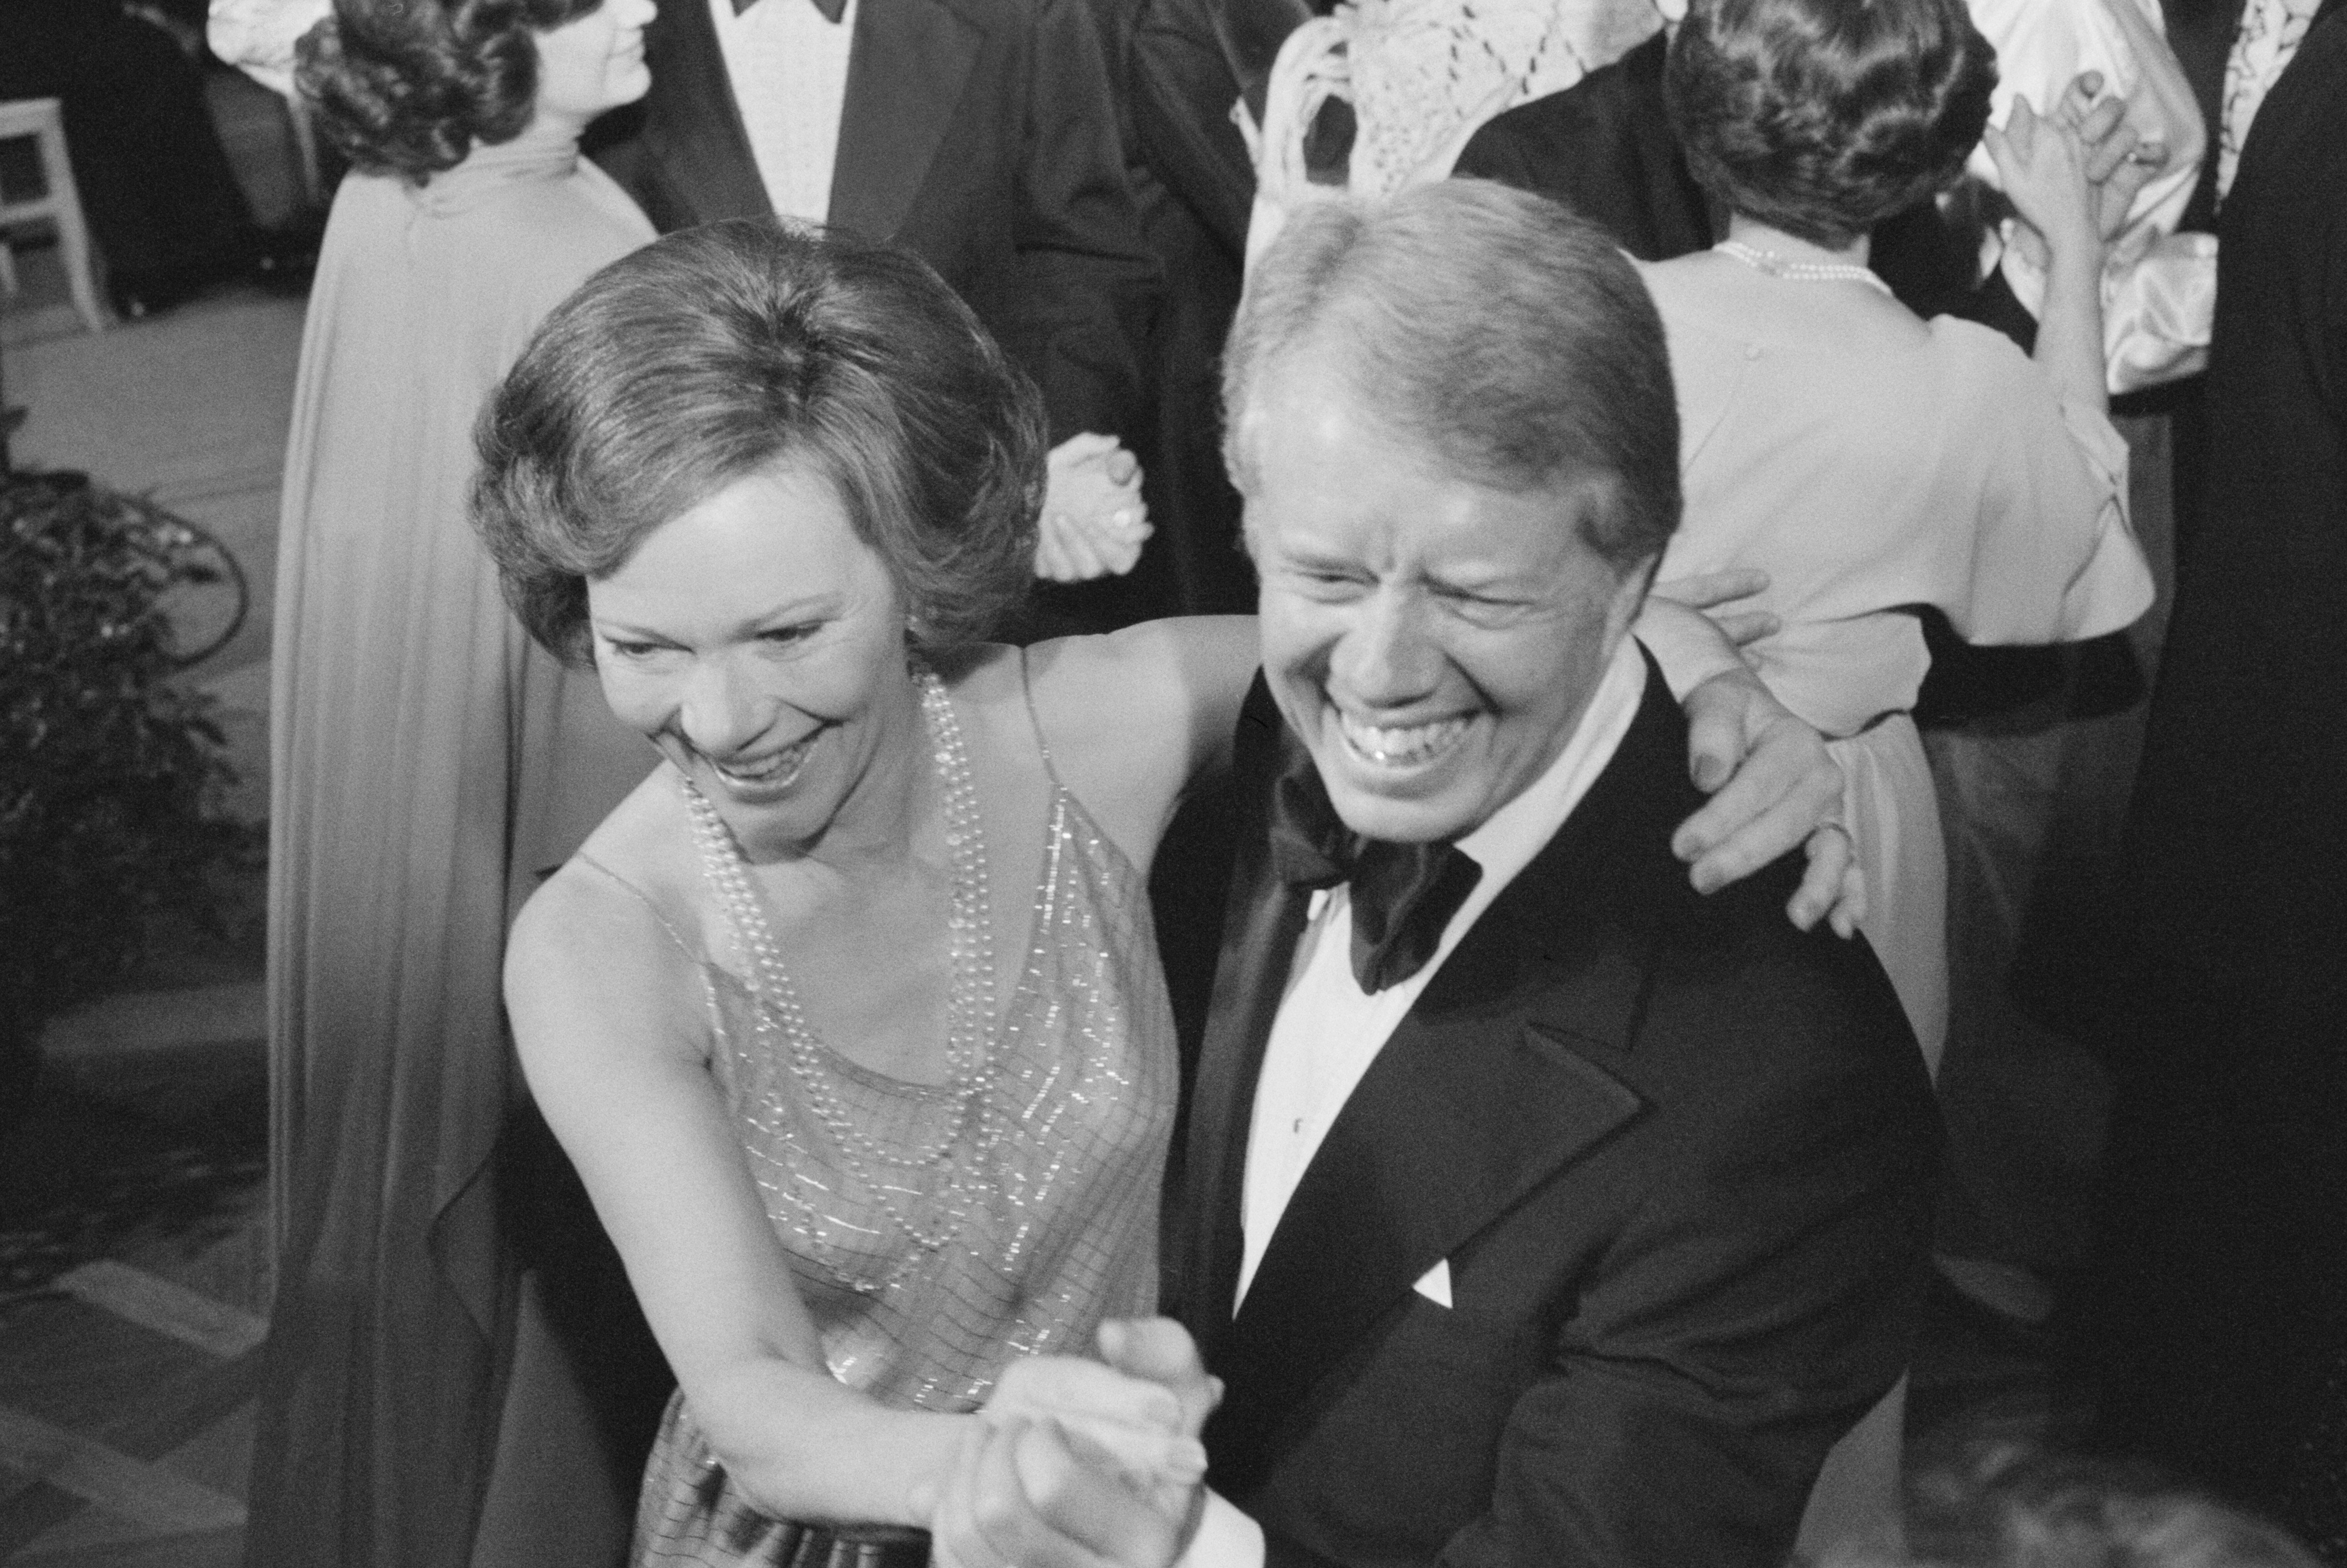 US President Jimmy Carter and First Lady Rosalynn Carter dance at a White House Congressional Ball in Washington, D.C., on December 13, 1978. | Source: Getty Images